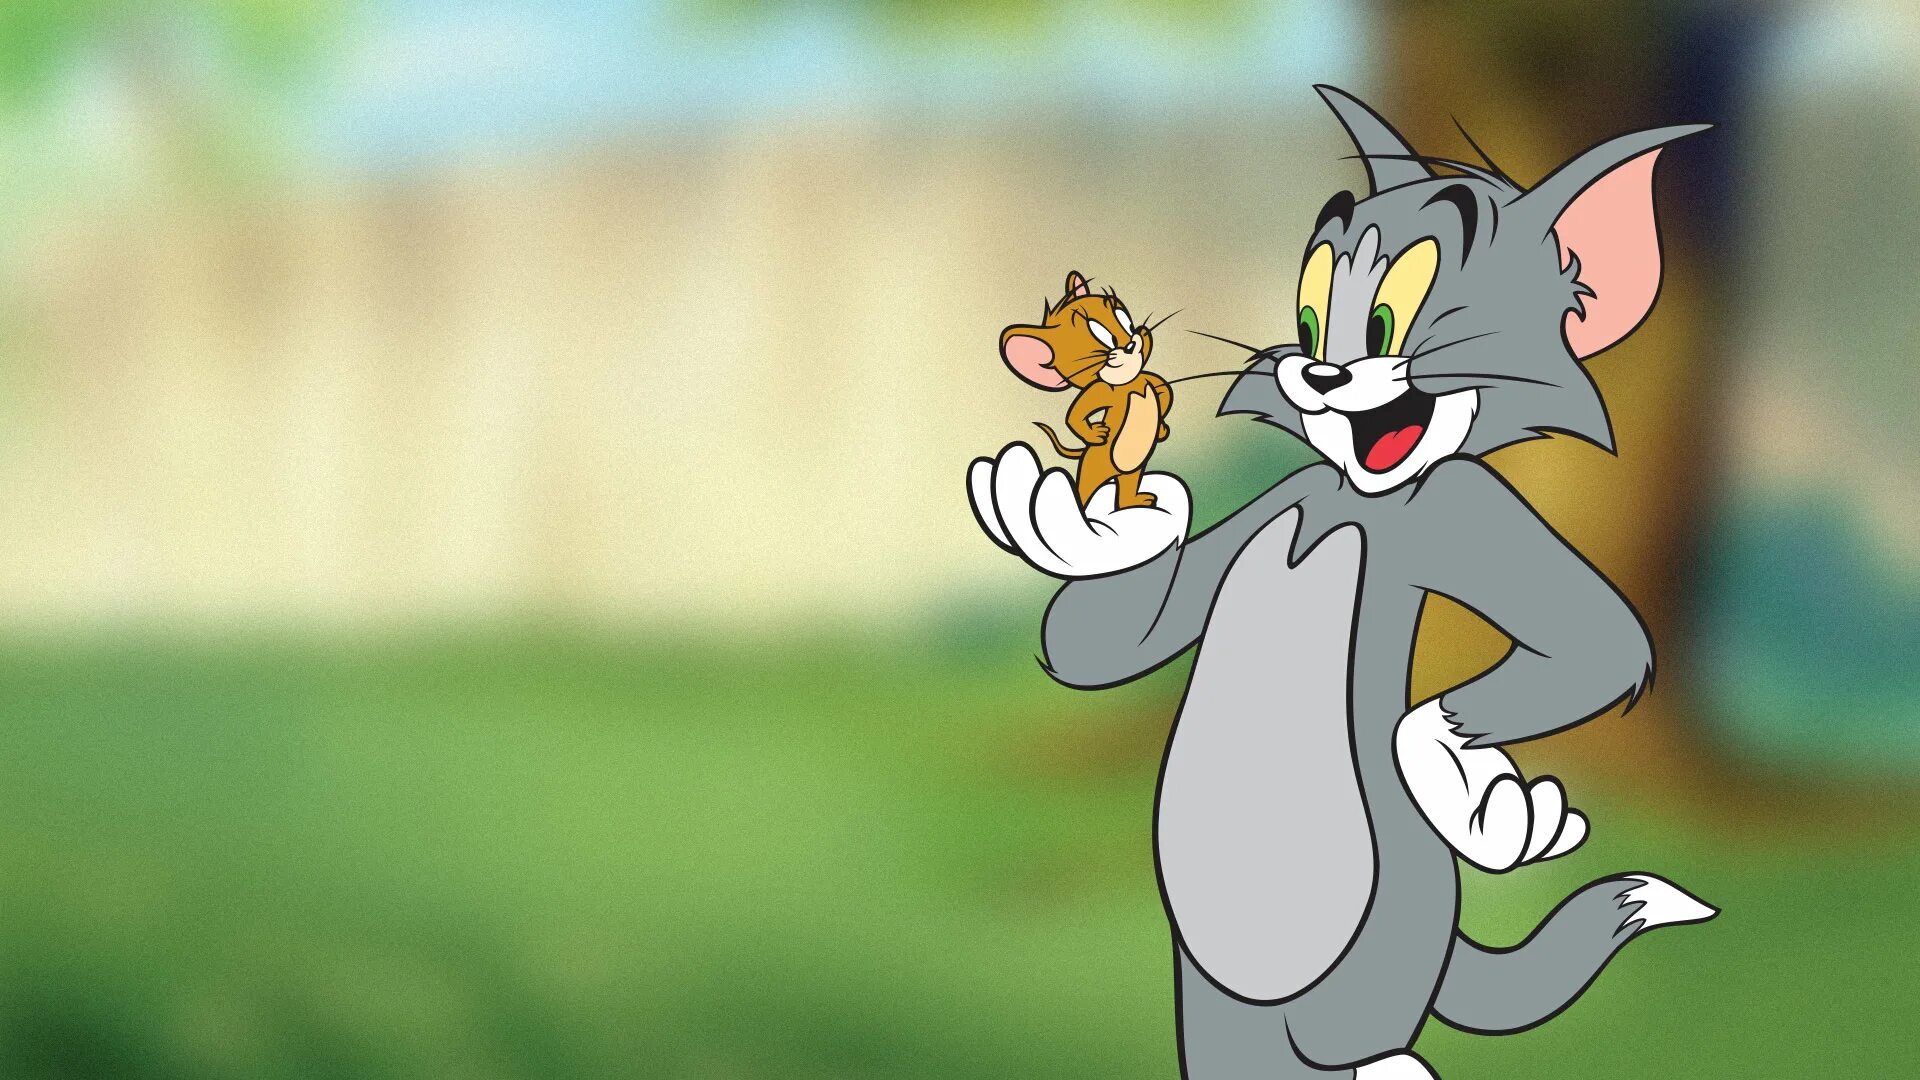 Tom and Jerry. Tommy jeryh. Том и Джерри (Tom and Jerry) 1940. Tom and Jerry 2012. 3 х лет на том